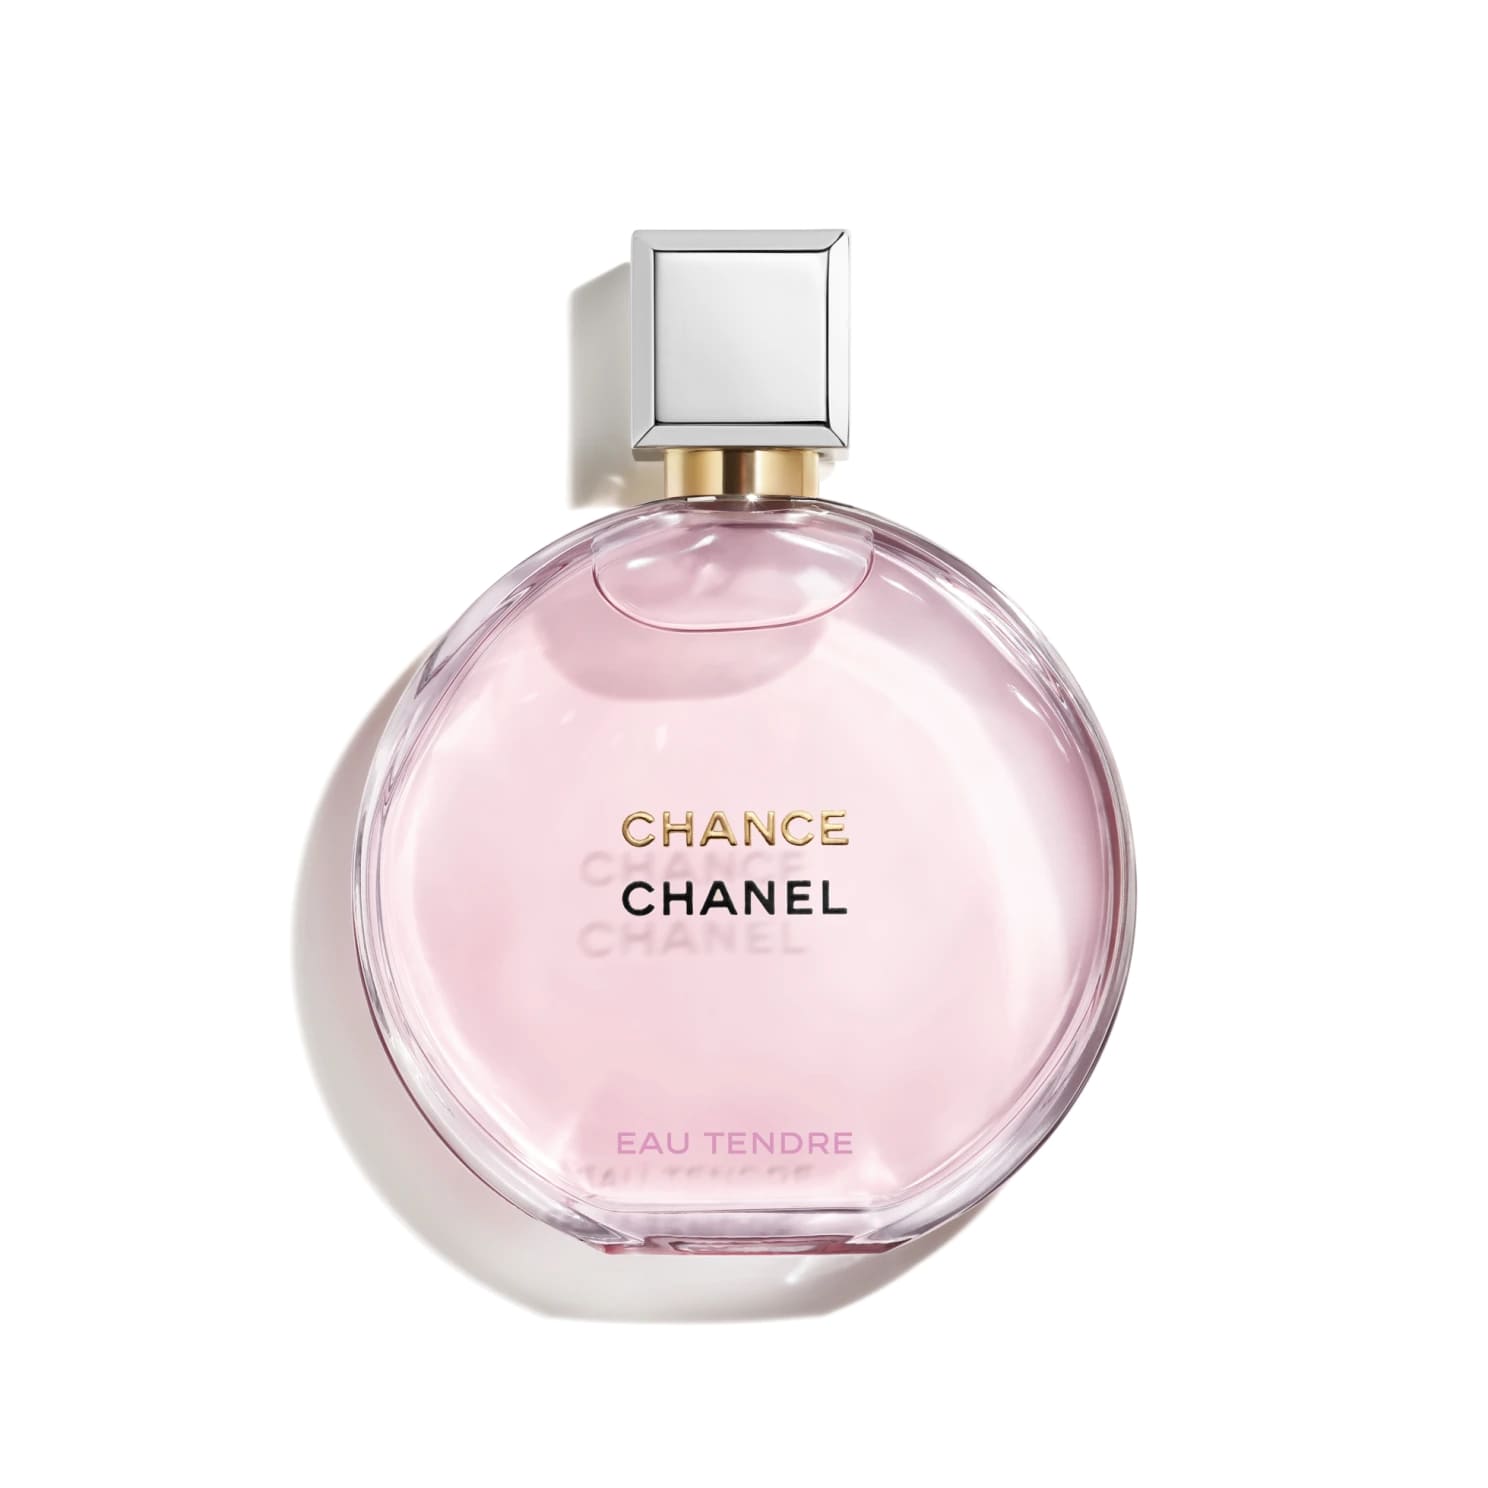 Chance Eau Tendre Perfume EDP Spray for Women by Chanel